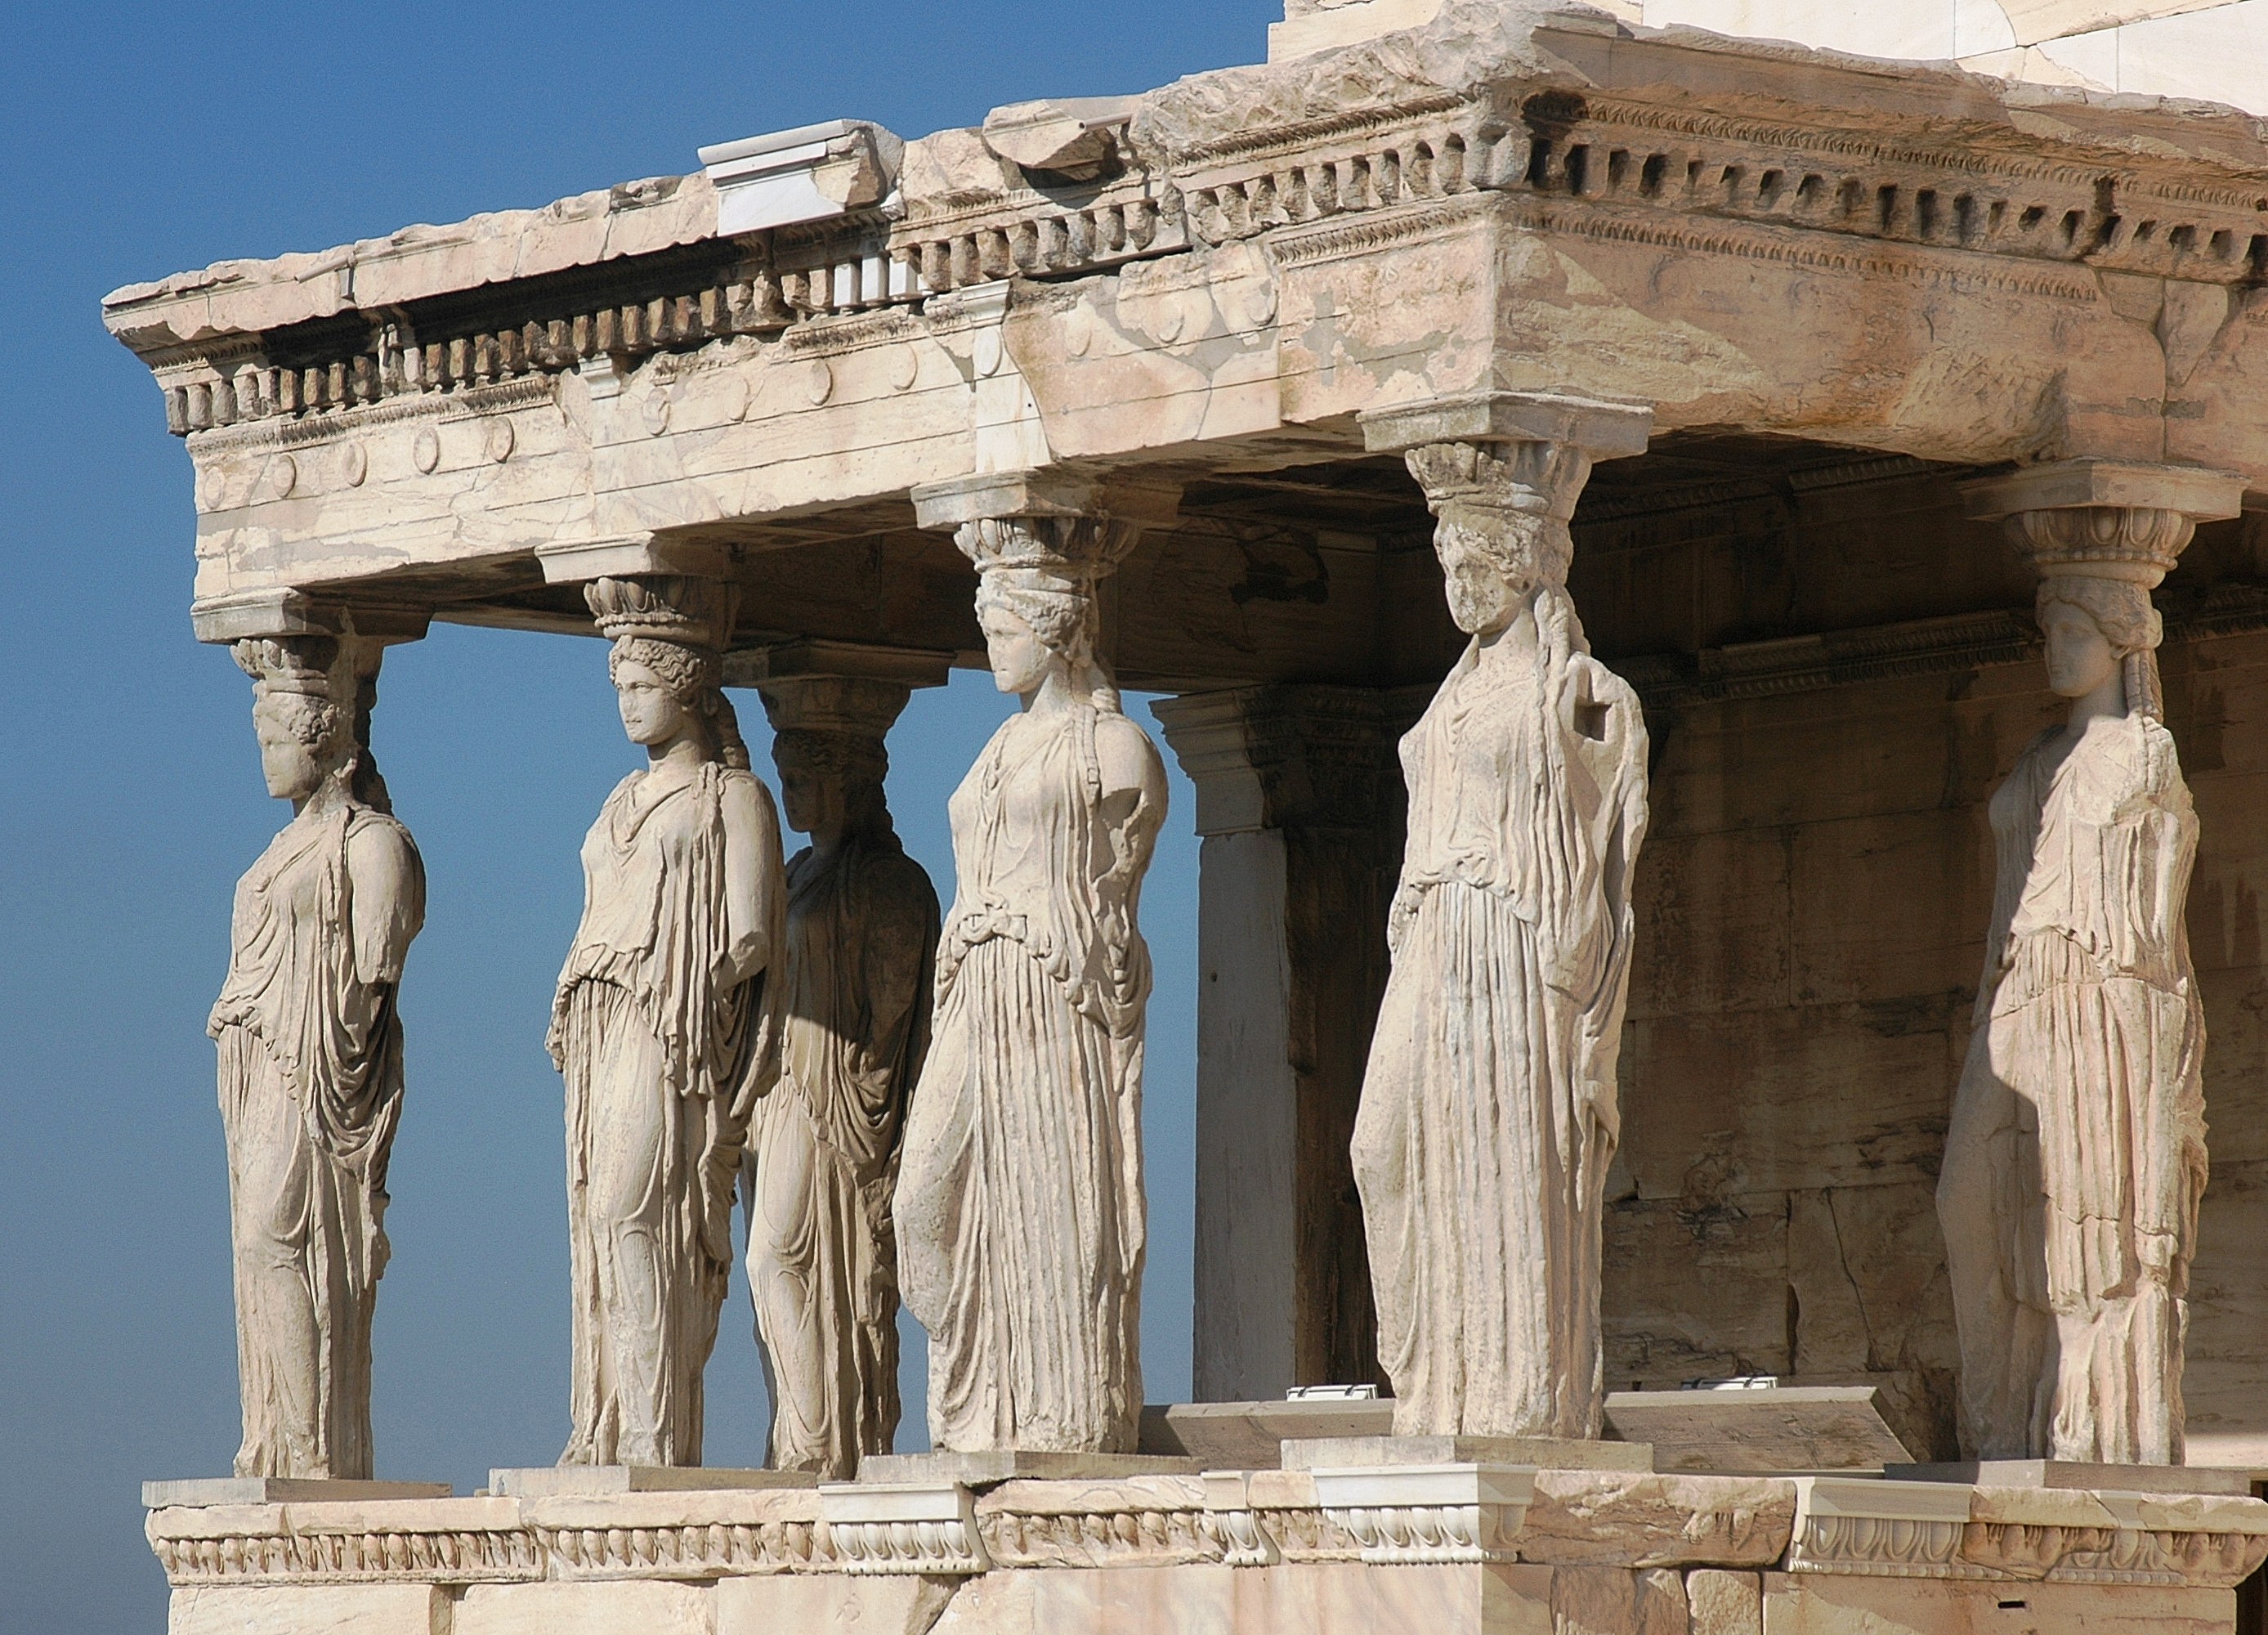 Ancient ruin with 6 sculptures of women wearing heavily draped robes functioning as pillars.